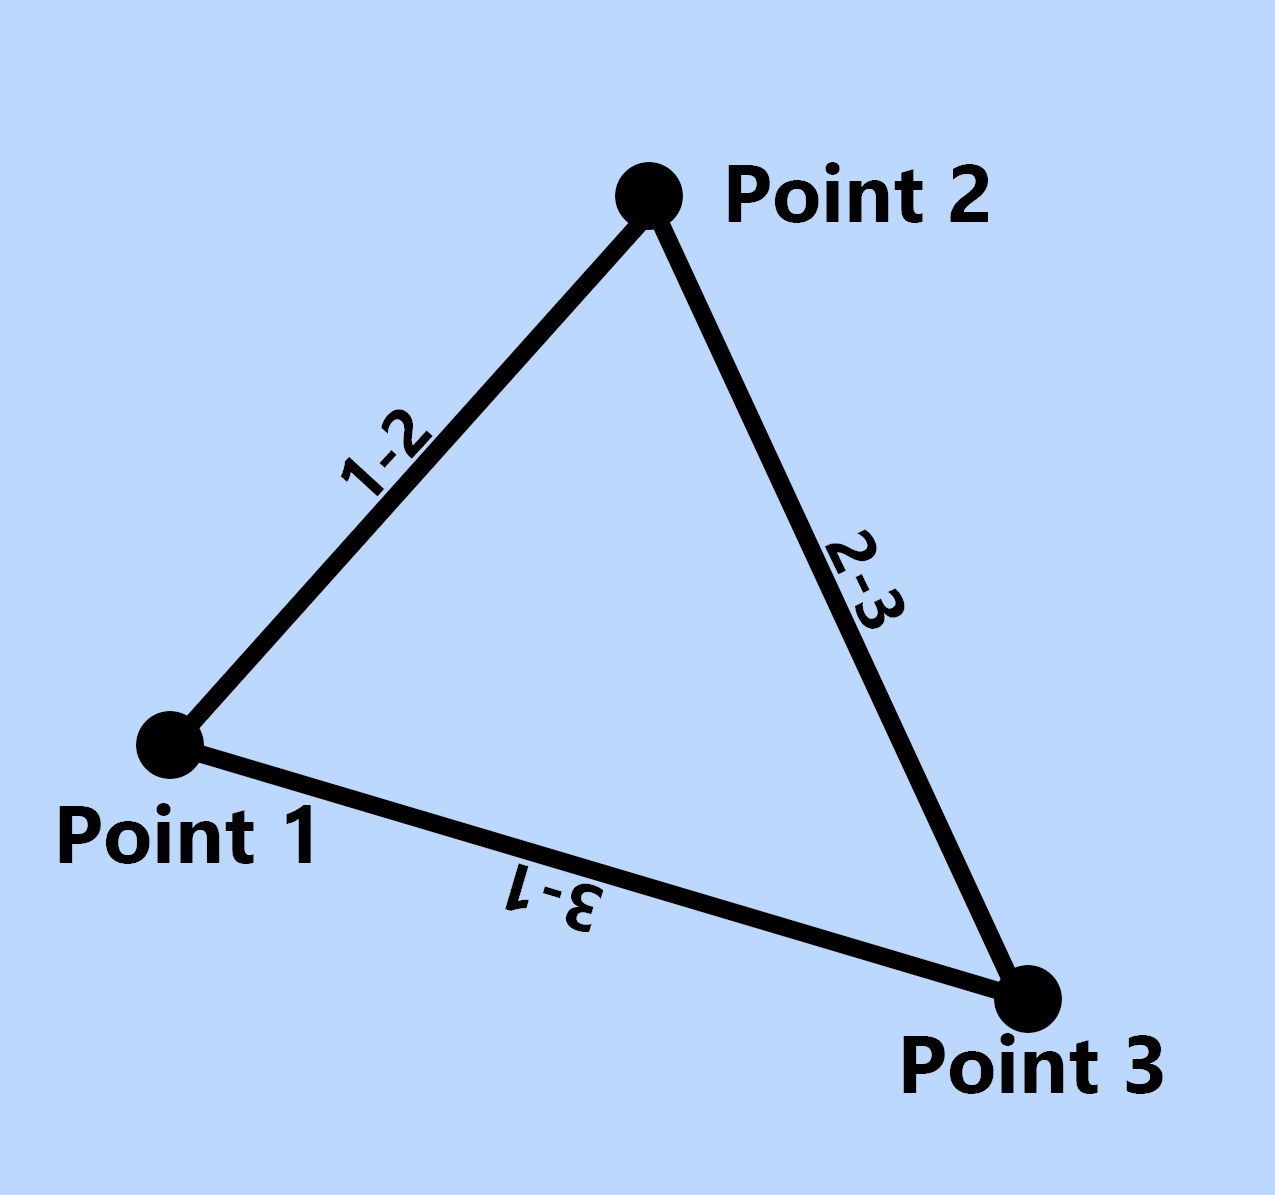 As points with lines